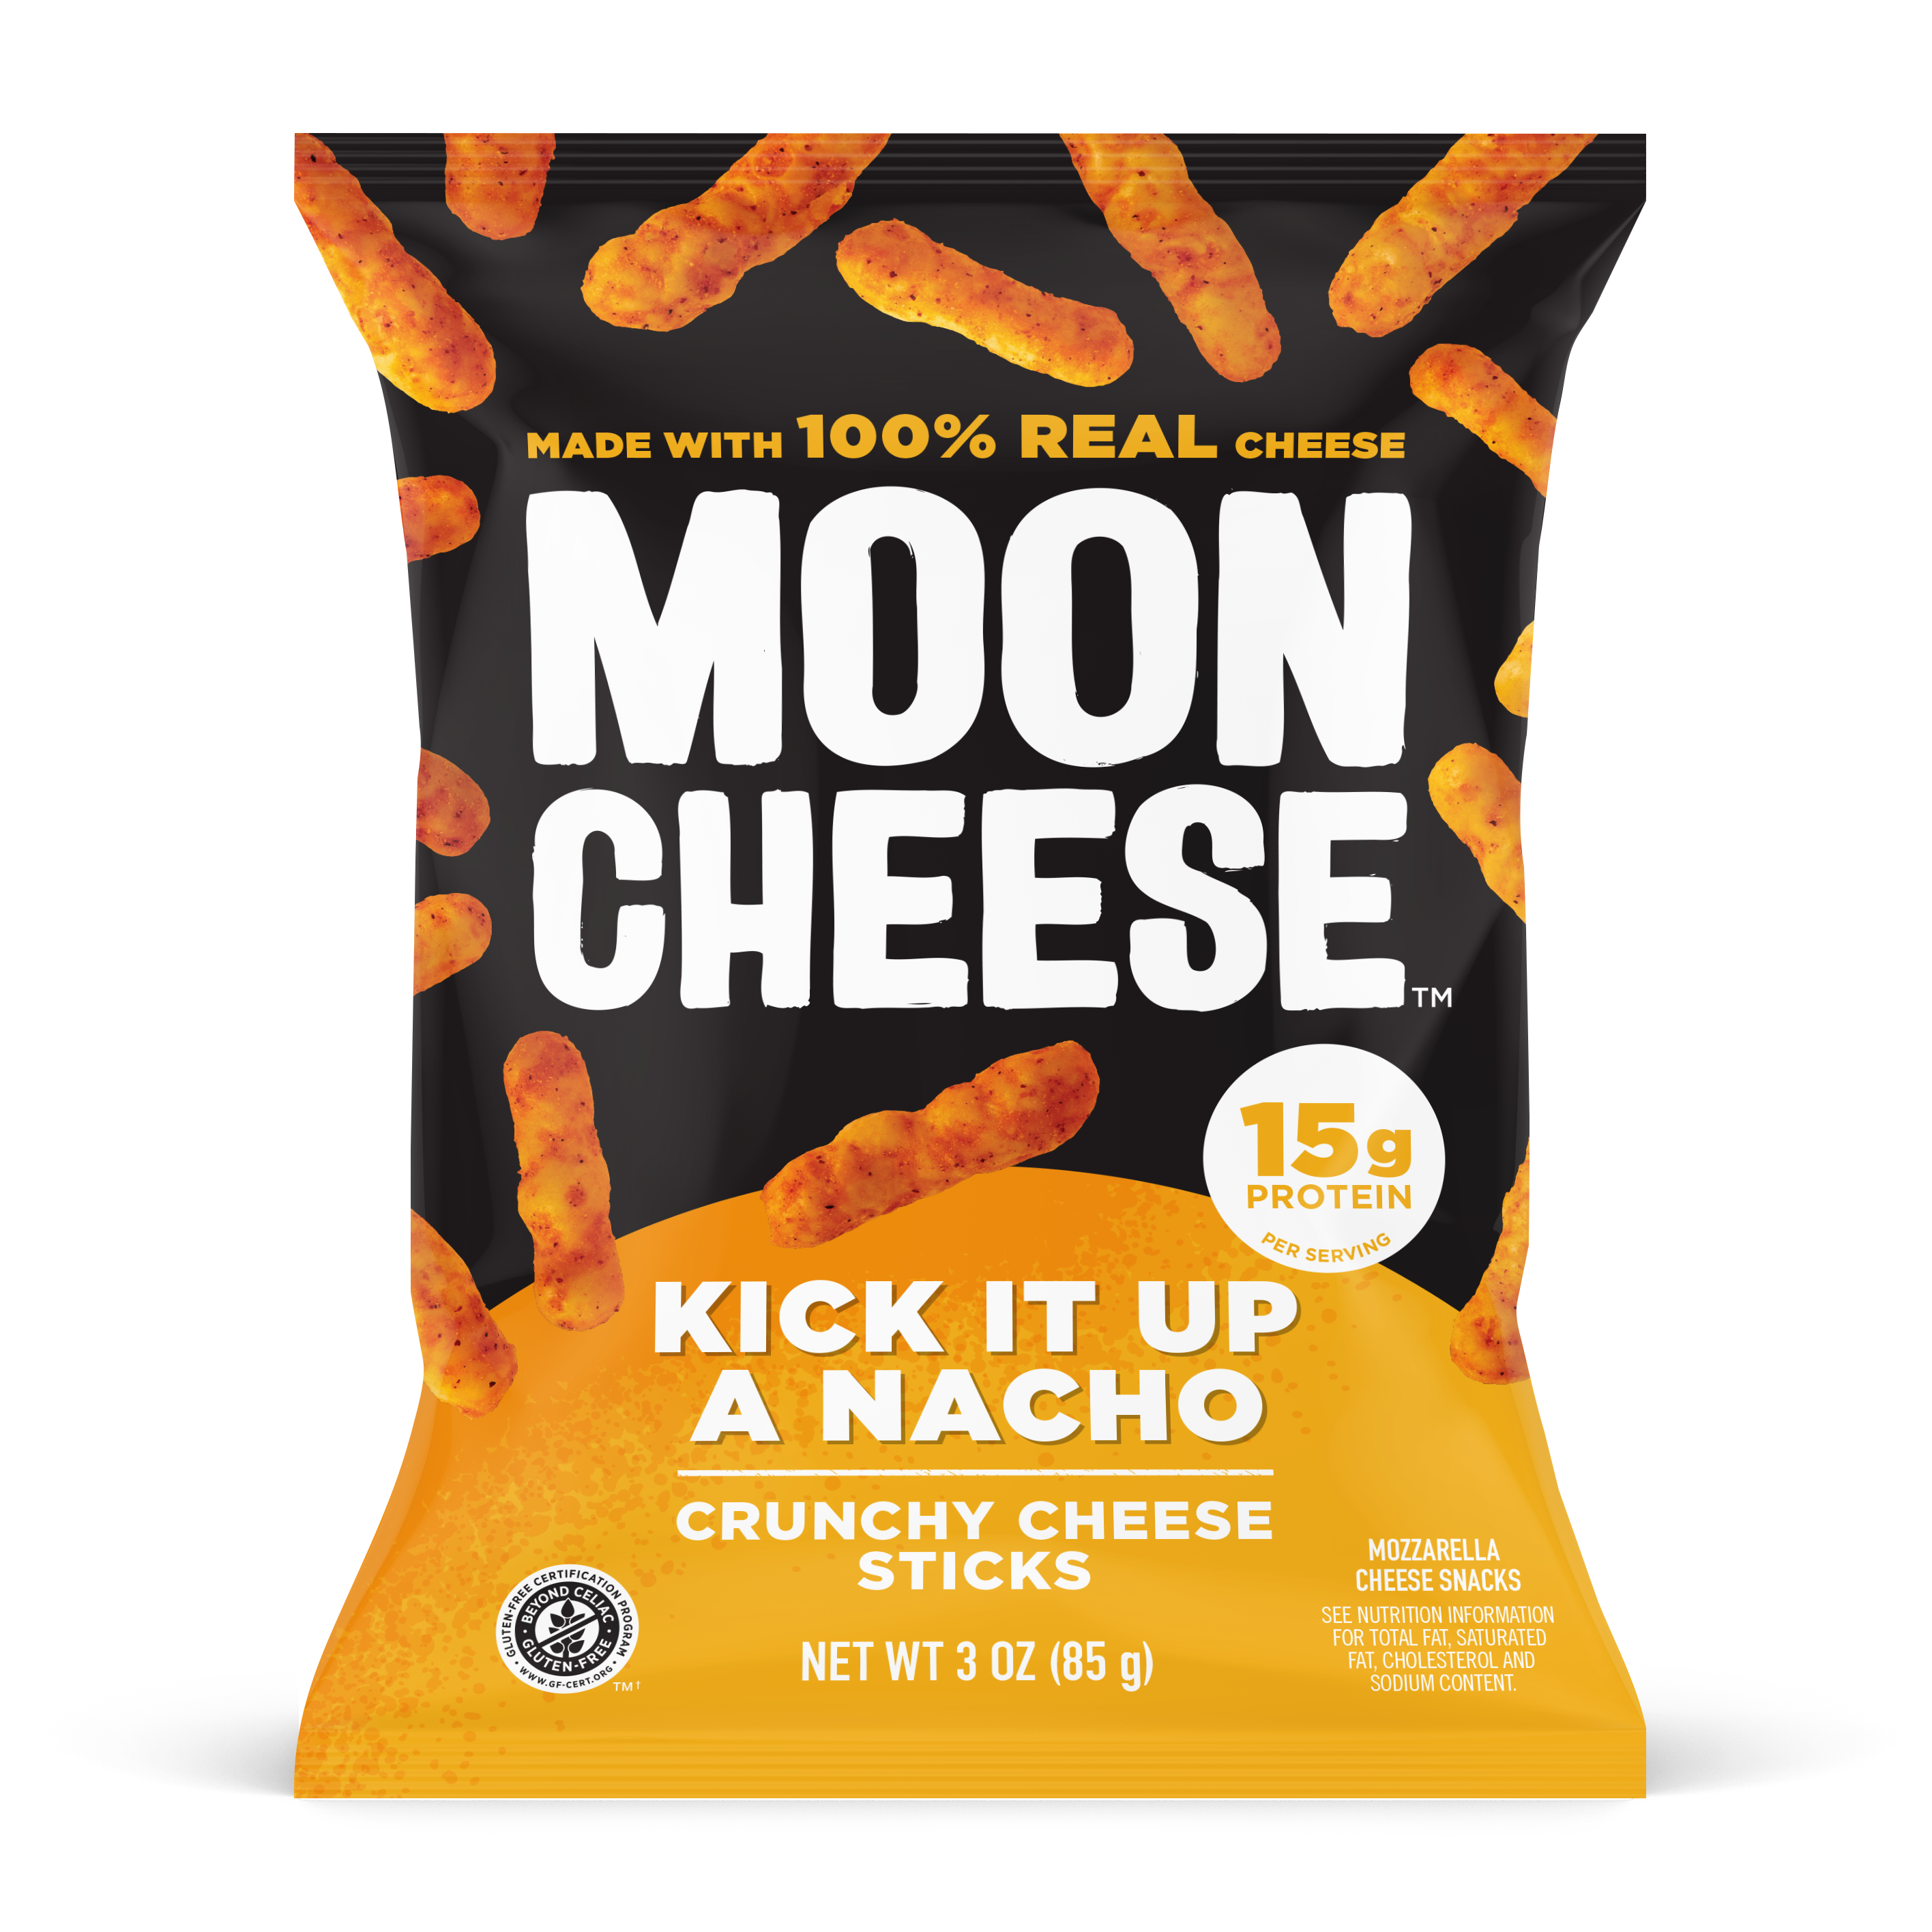 Package of crunchy cheese sticks in 'kick it up a nacho' flavor.